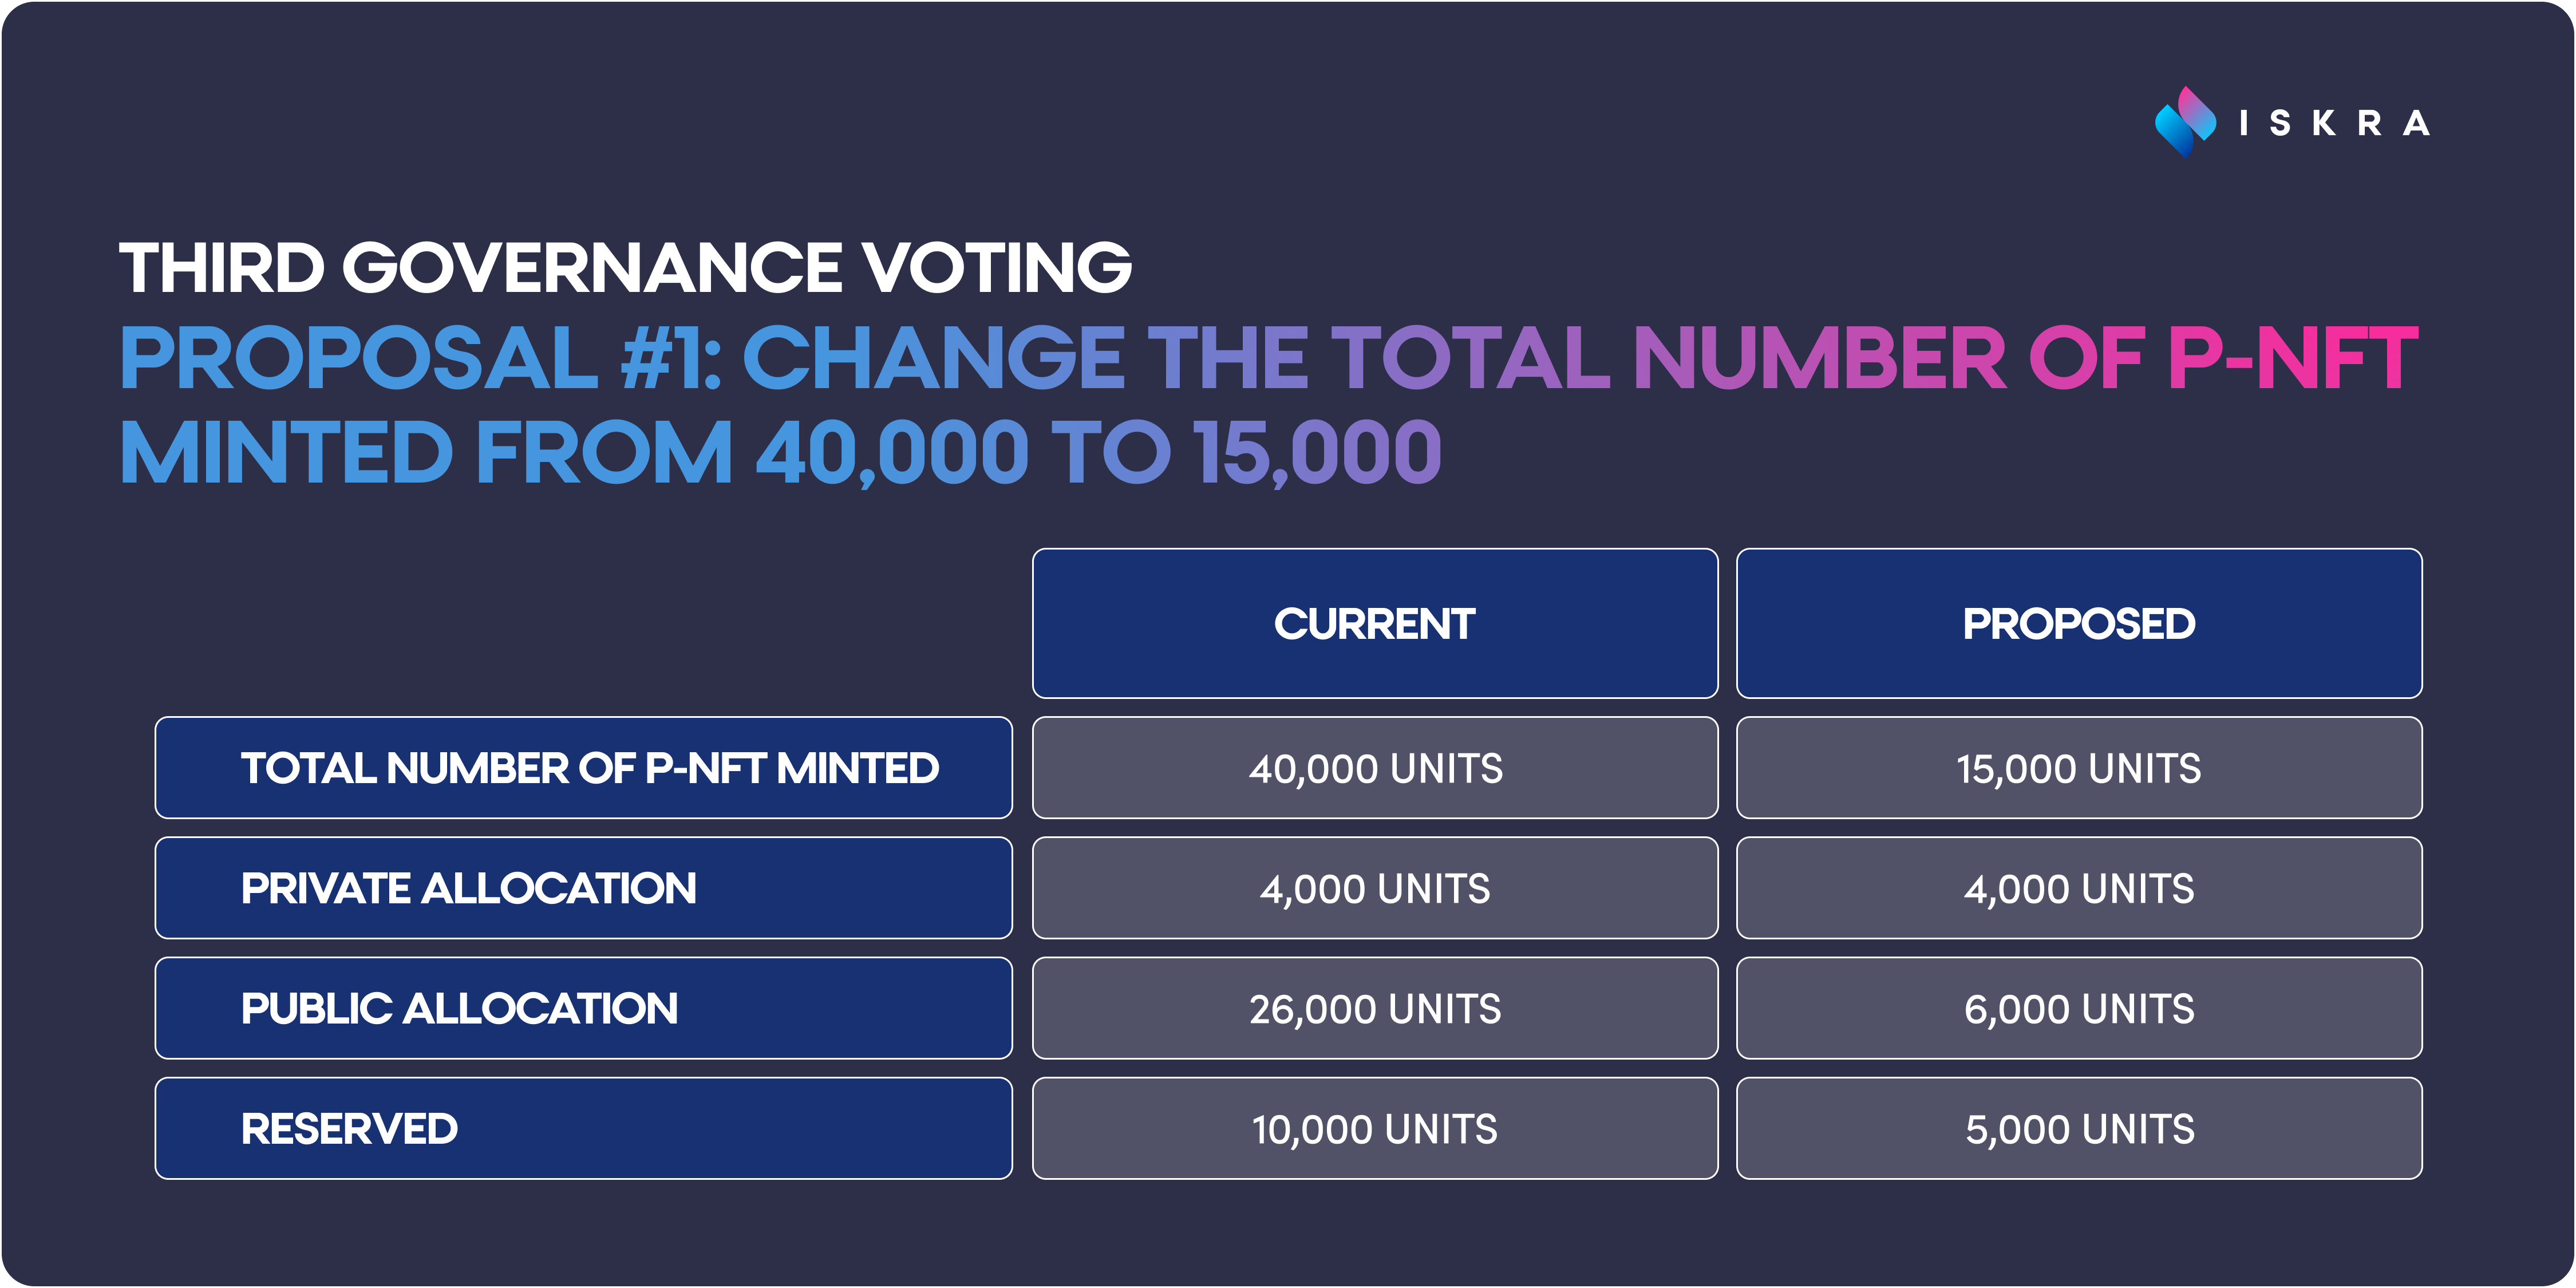 The third governance voting of Iskra covers three (3) proposals to entirely restructure the token economy for P-NFT staking.